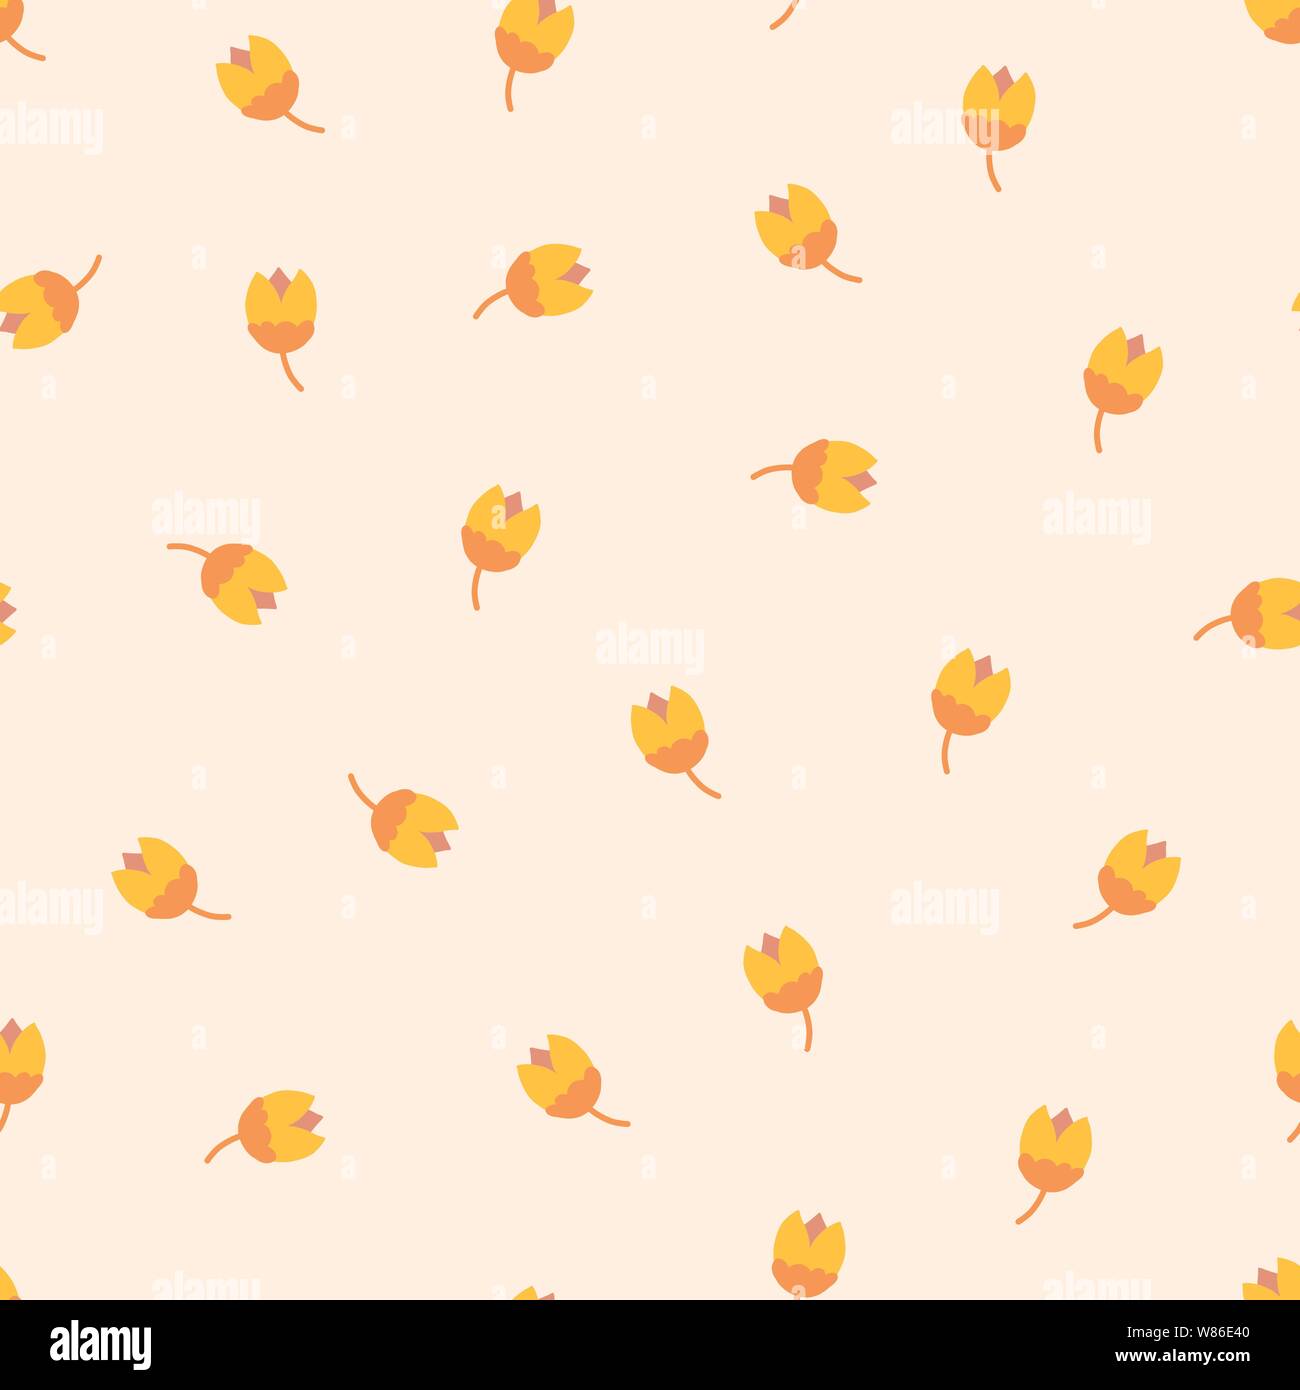 Scandinavian tulip flowers seamless vector pattern. Small folk florals repeating background. Scattered ditsy flowers yellow orange pink . Fabric Stock Vector